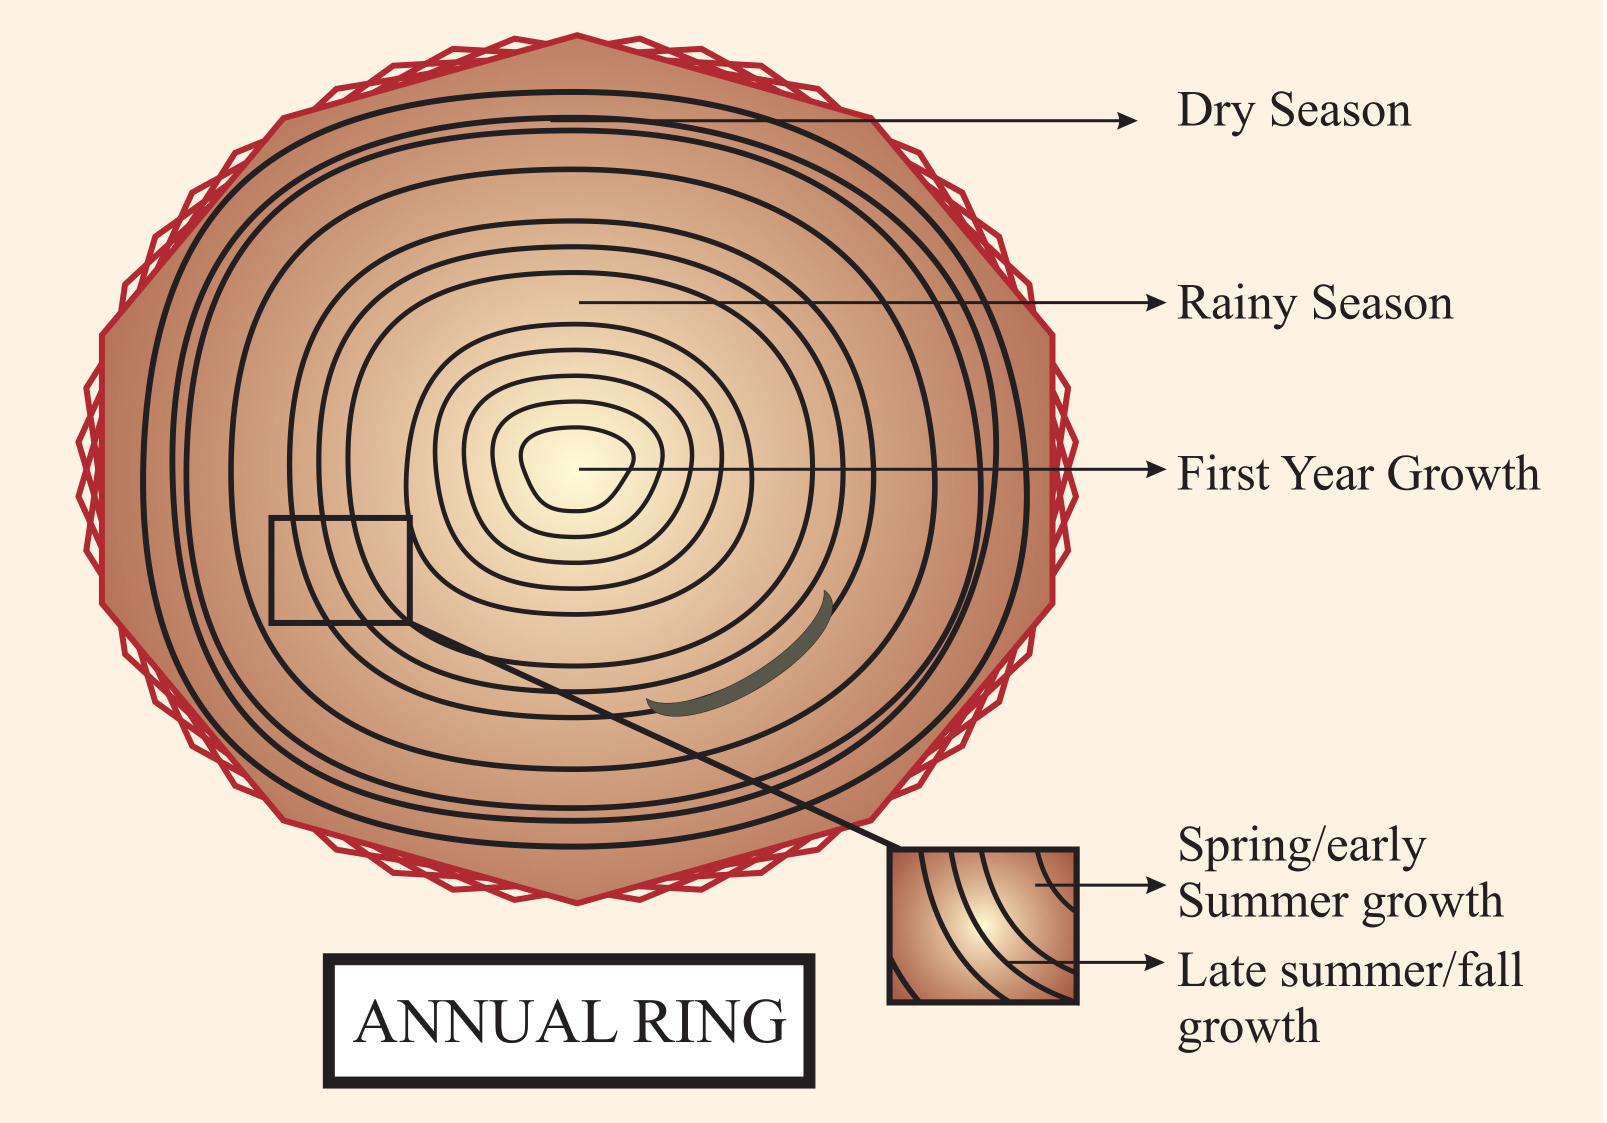 Tree Story' explores what tree rings can tell us about the past